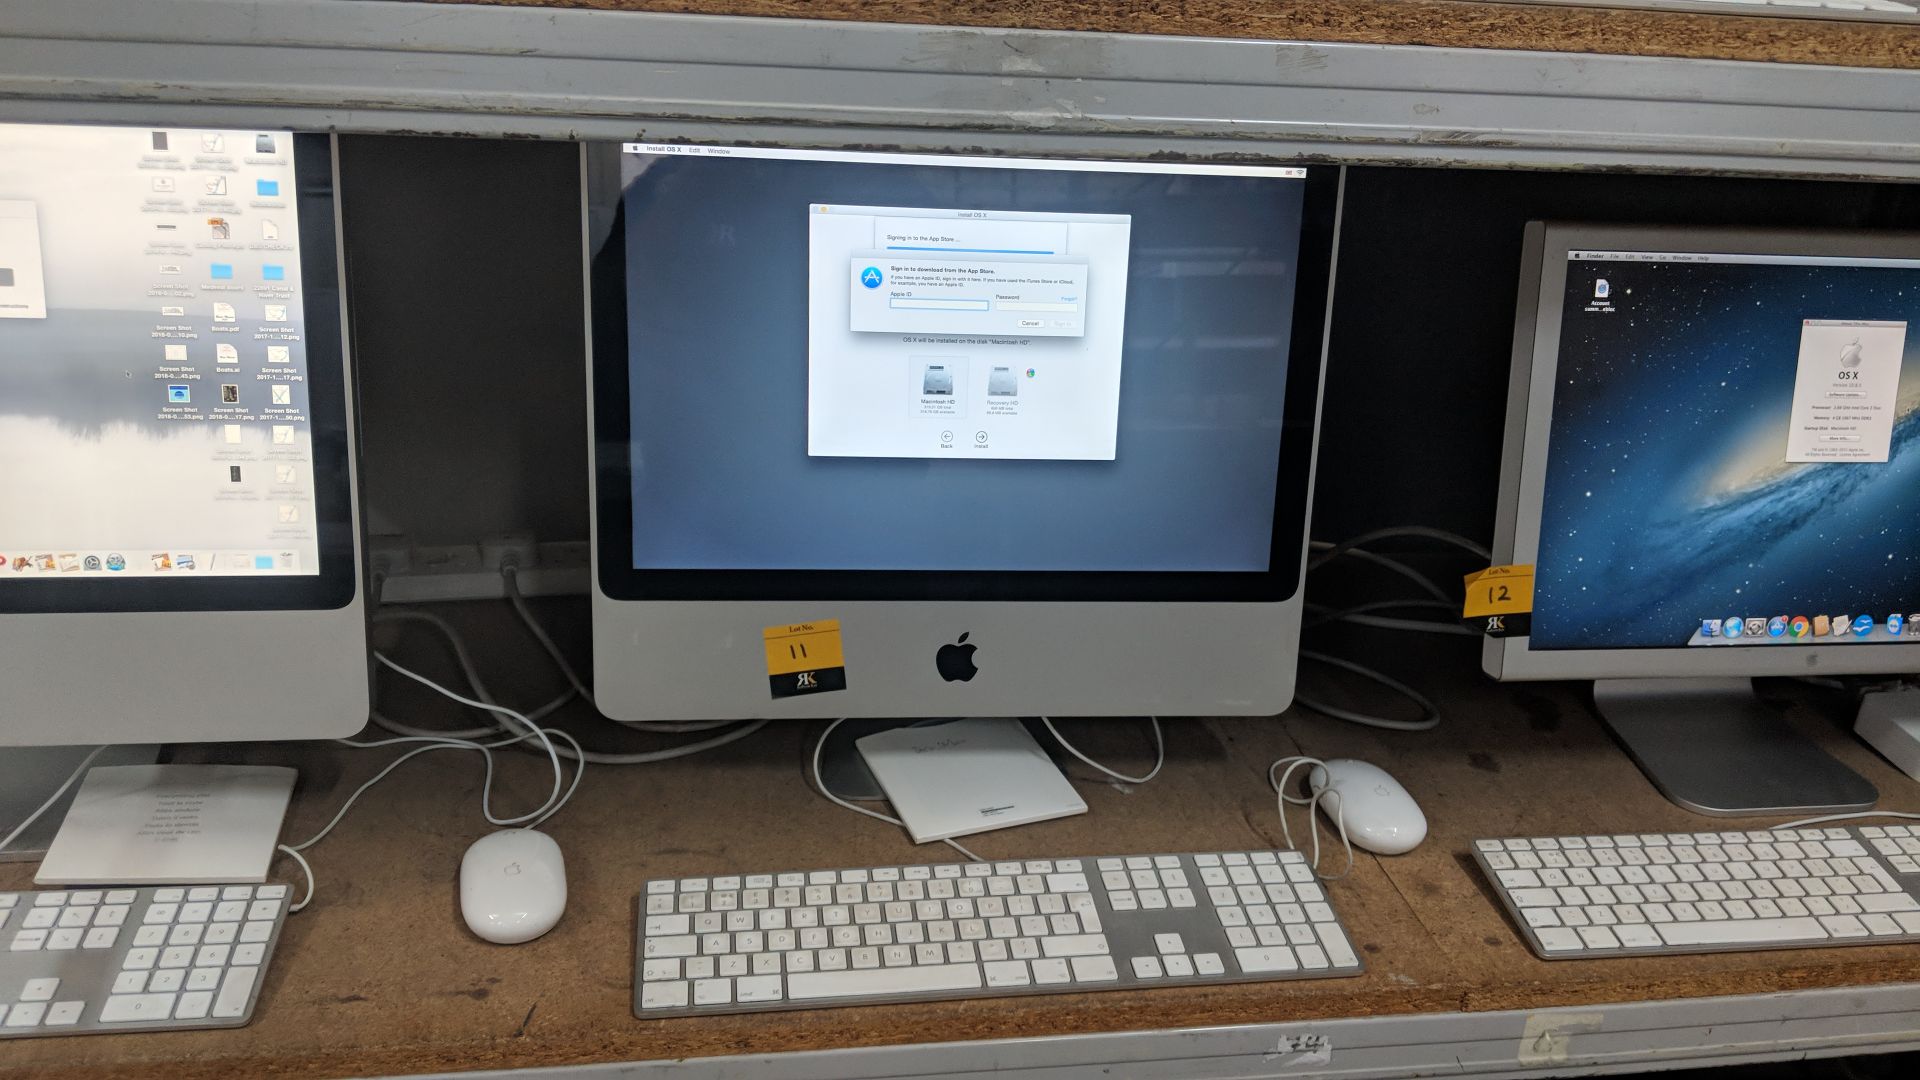 Apple iMac 20" computer with 2.66GHz Intel Core 2 duo processor